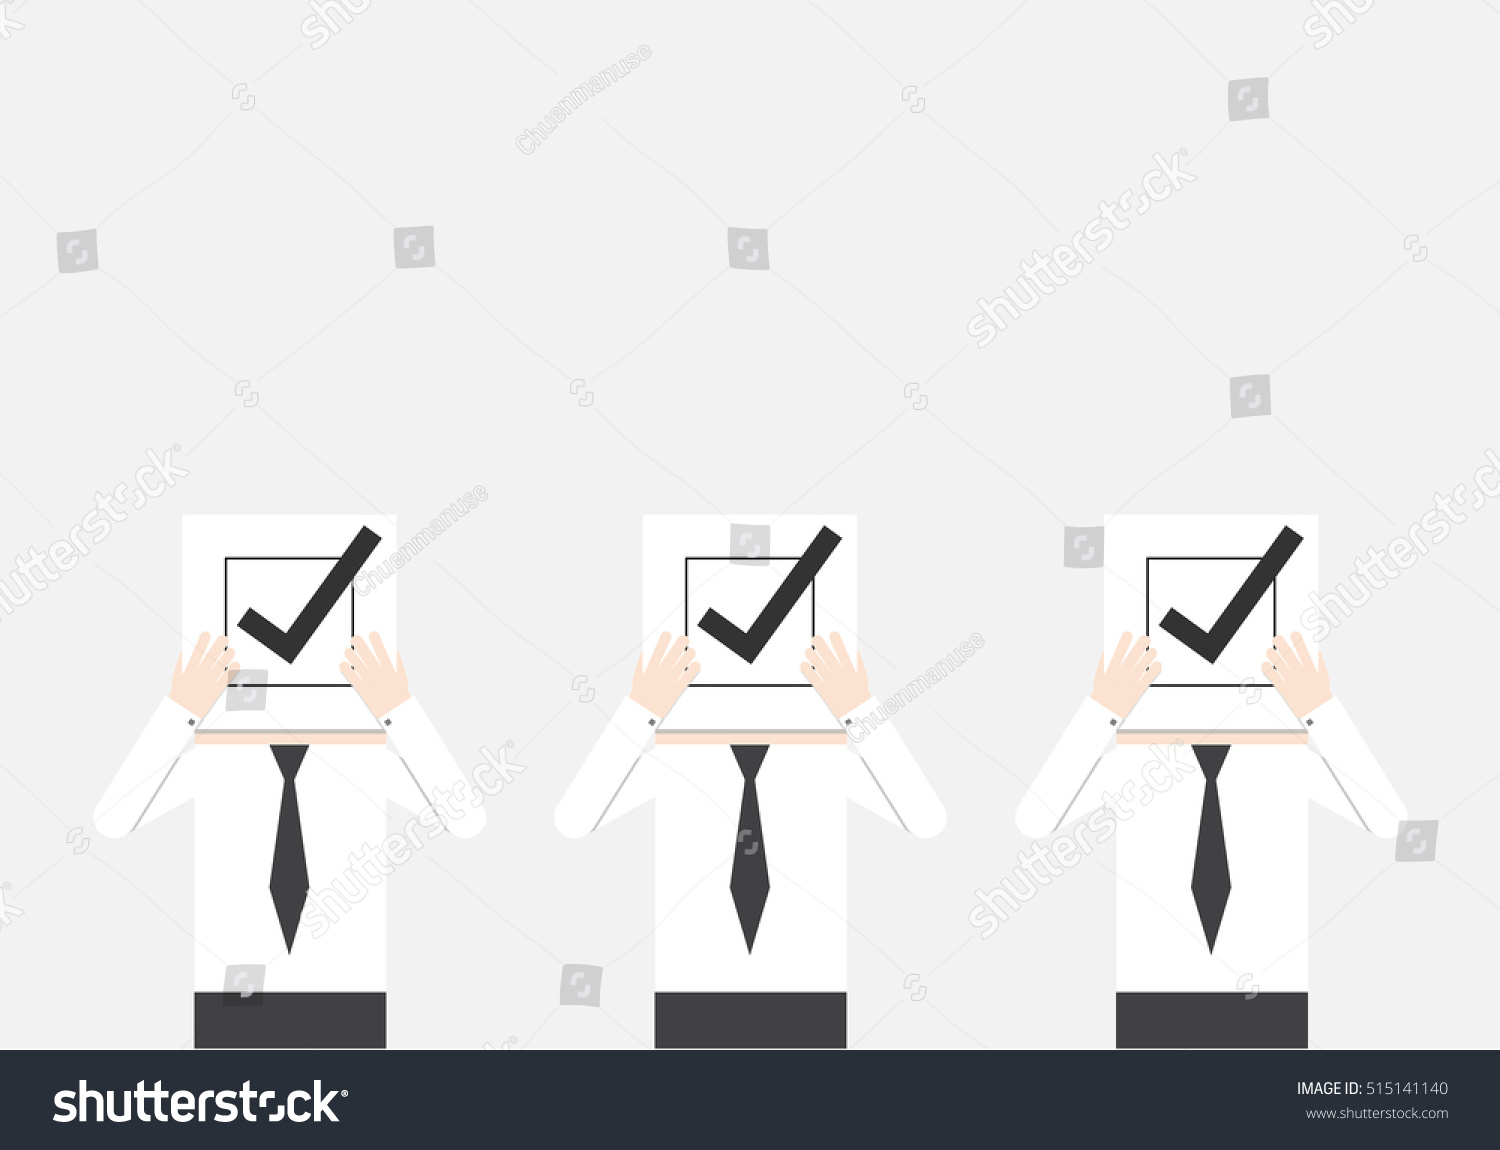 businessmen holding a paper with check box sign, concept of decision making process. choosing people. select to promote. find right answer. career opportunity. unanimous conclusion. building team work #515141140